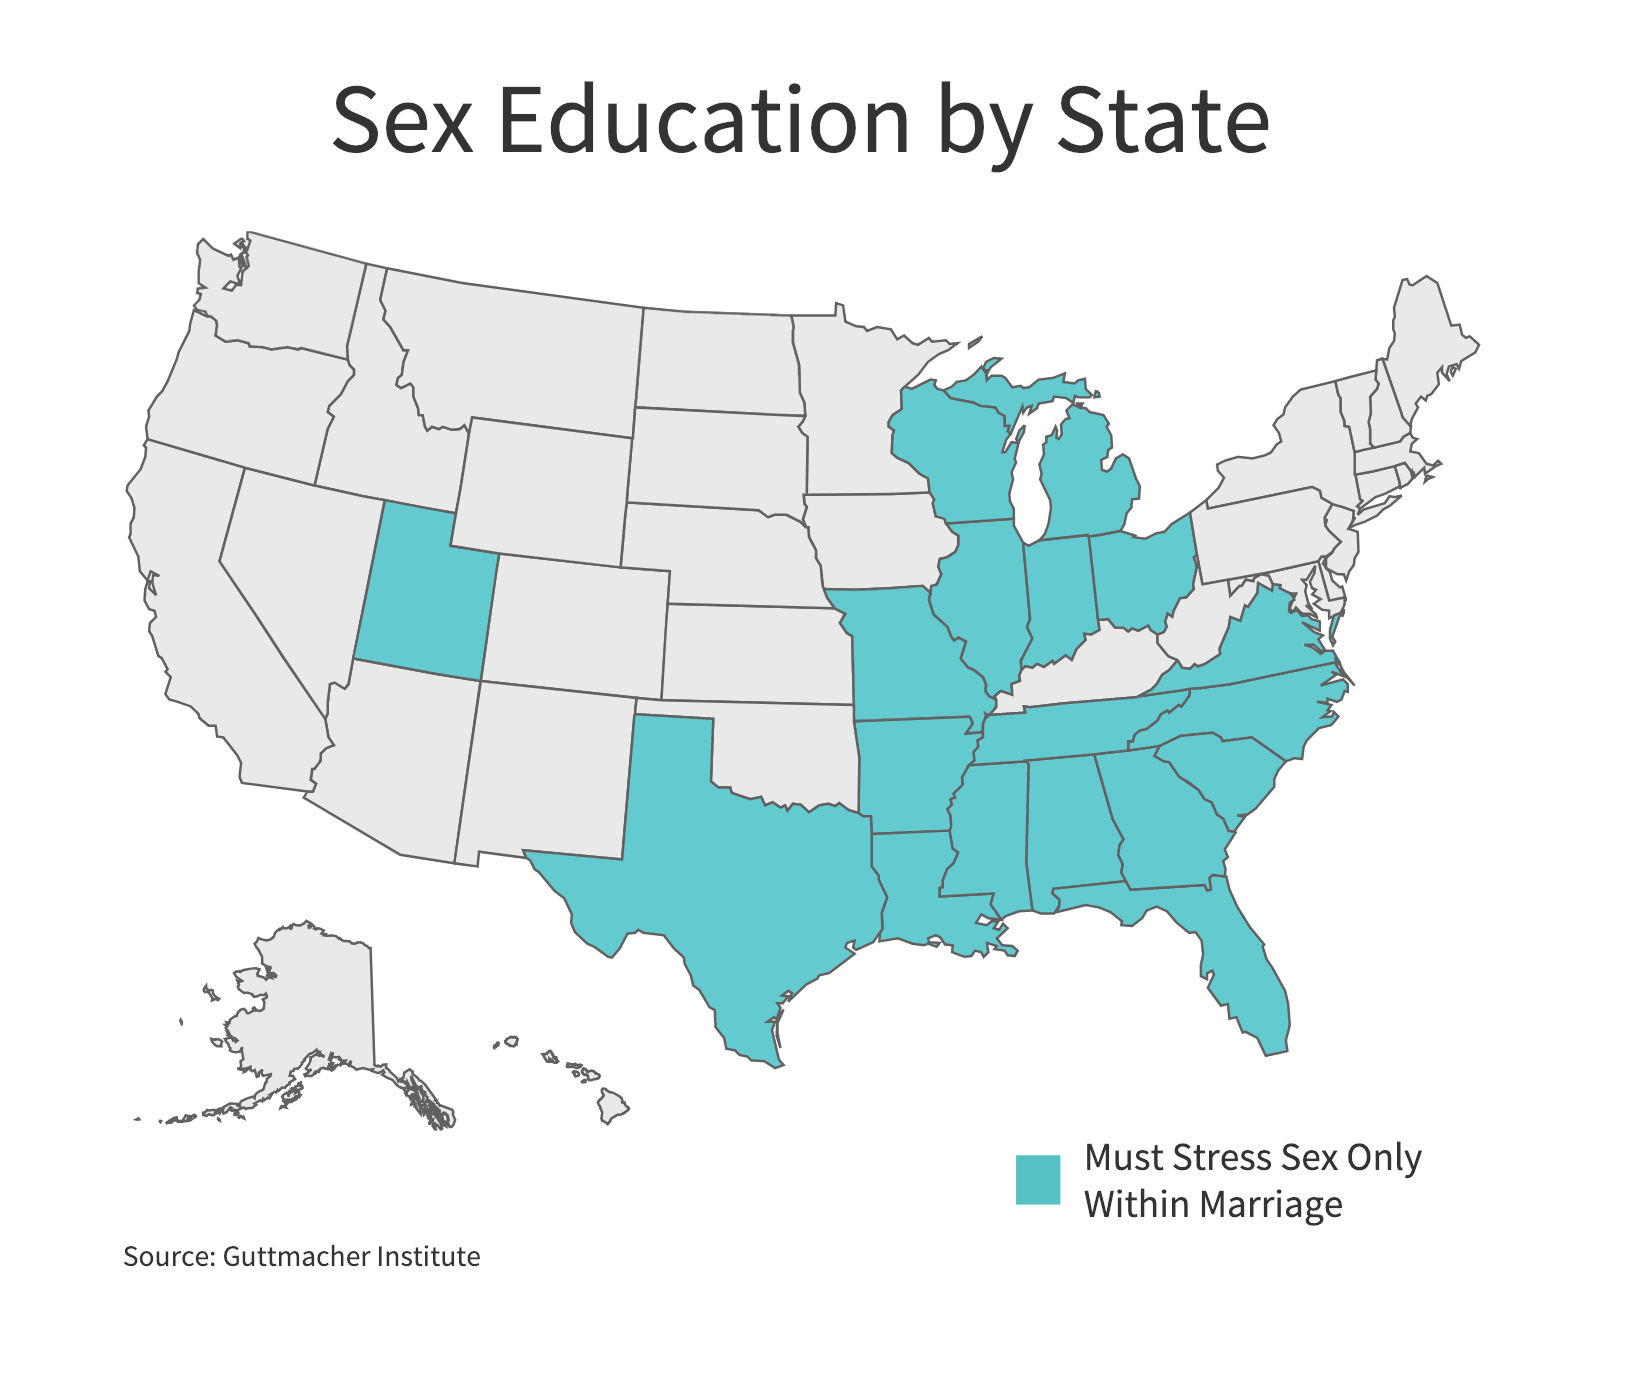 Eighteen states require that when sexual education is provided it include information on the importance of sex only within marriage. (Charts by Ester Wells/MNS)